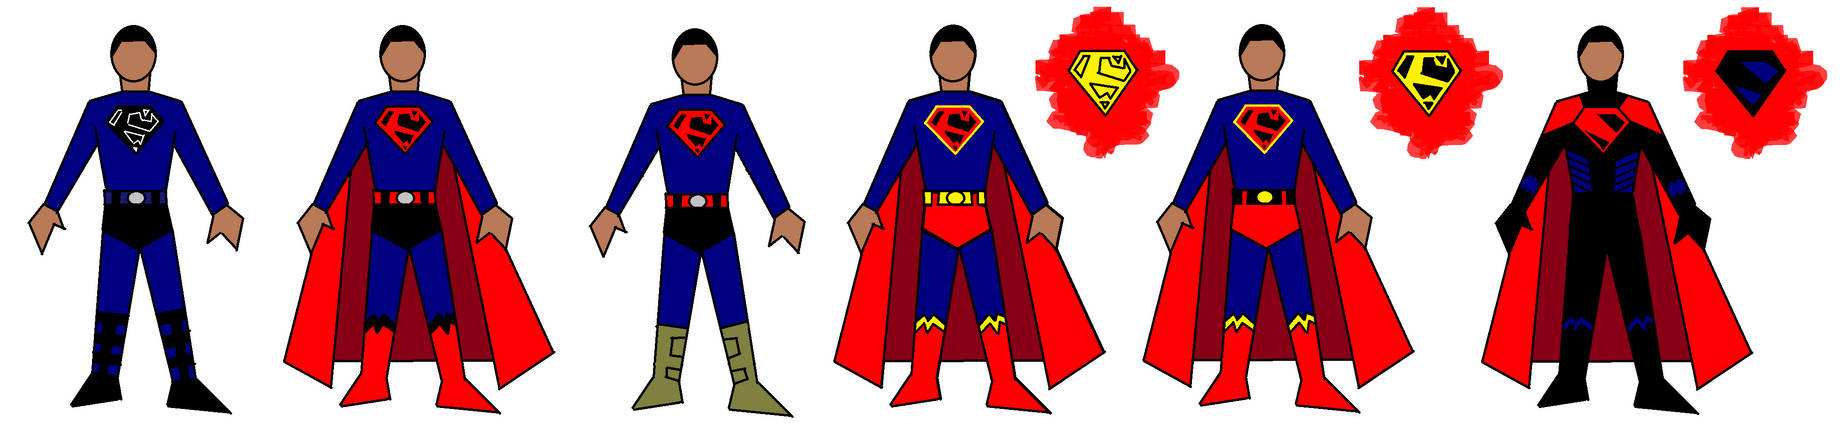 superman_s_costume_through_the_years__universe_1__by_duracellenergizer_ddly6gl-pre.jpg